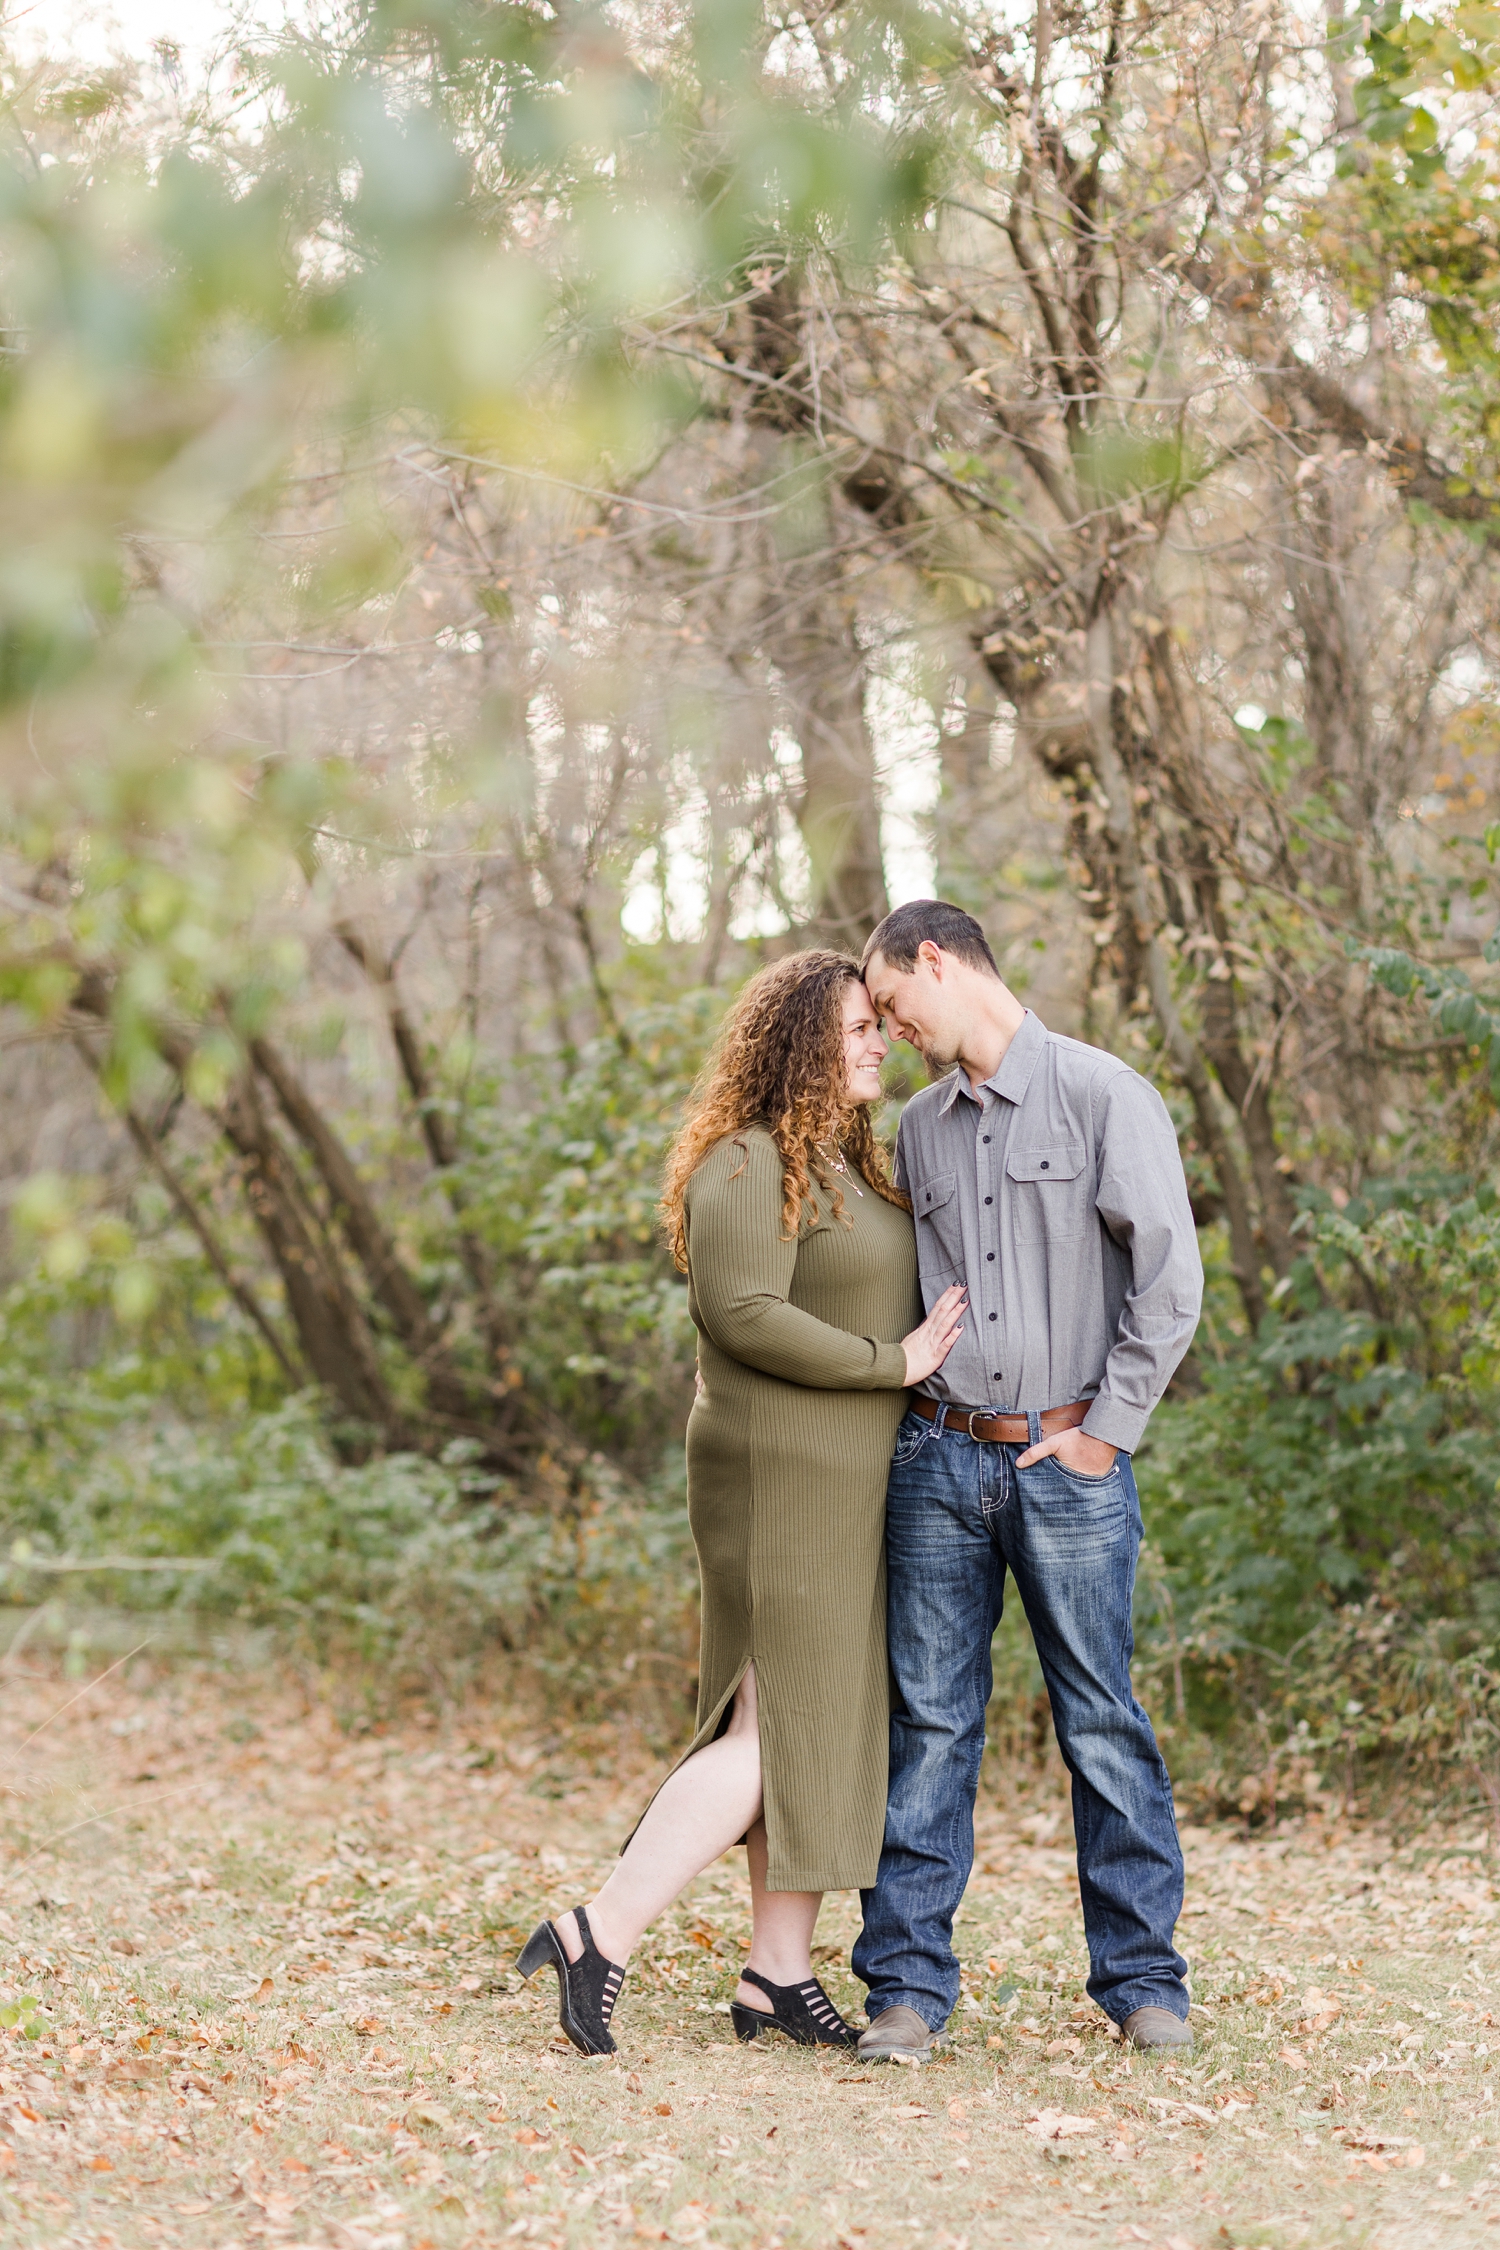 Holly and Dakota embrace under a path of trees | CB Studio